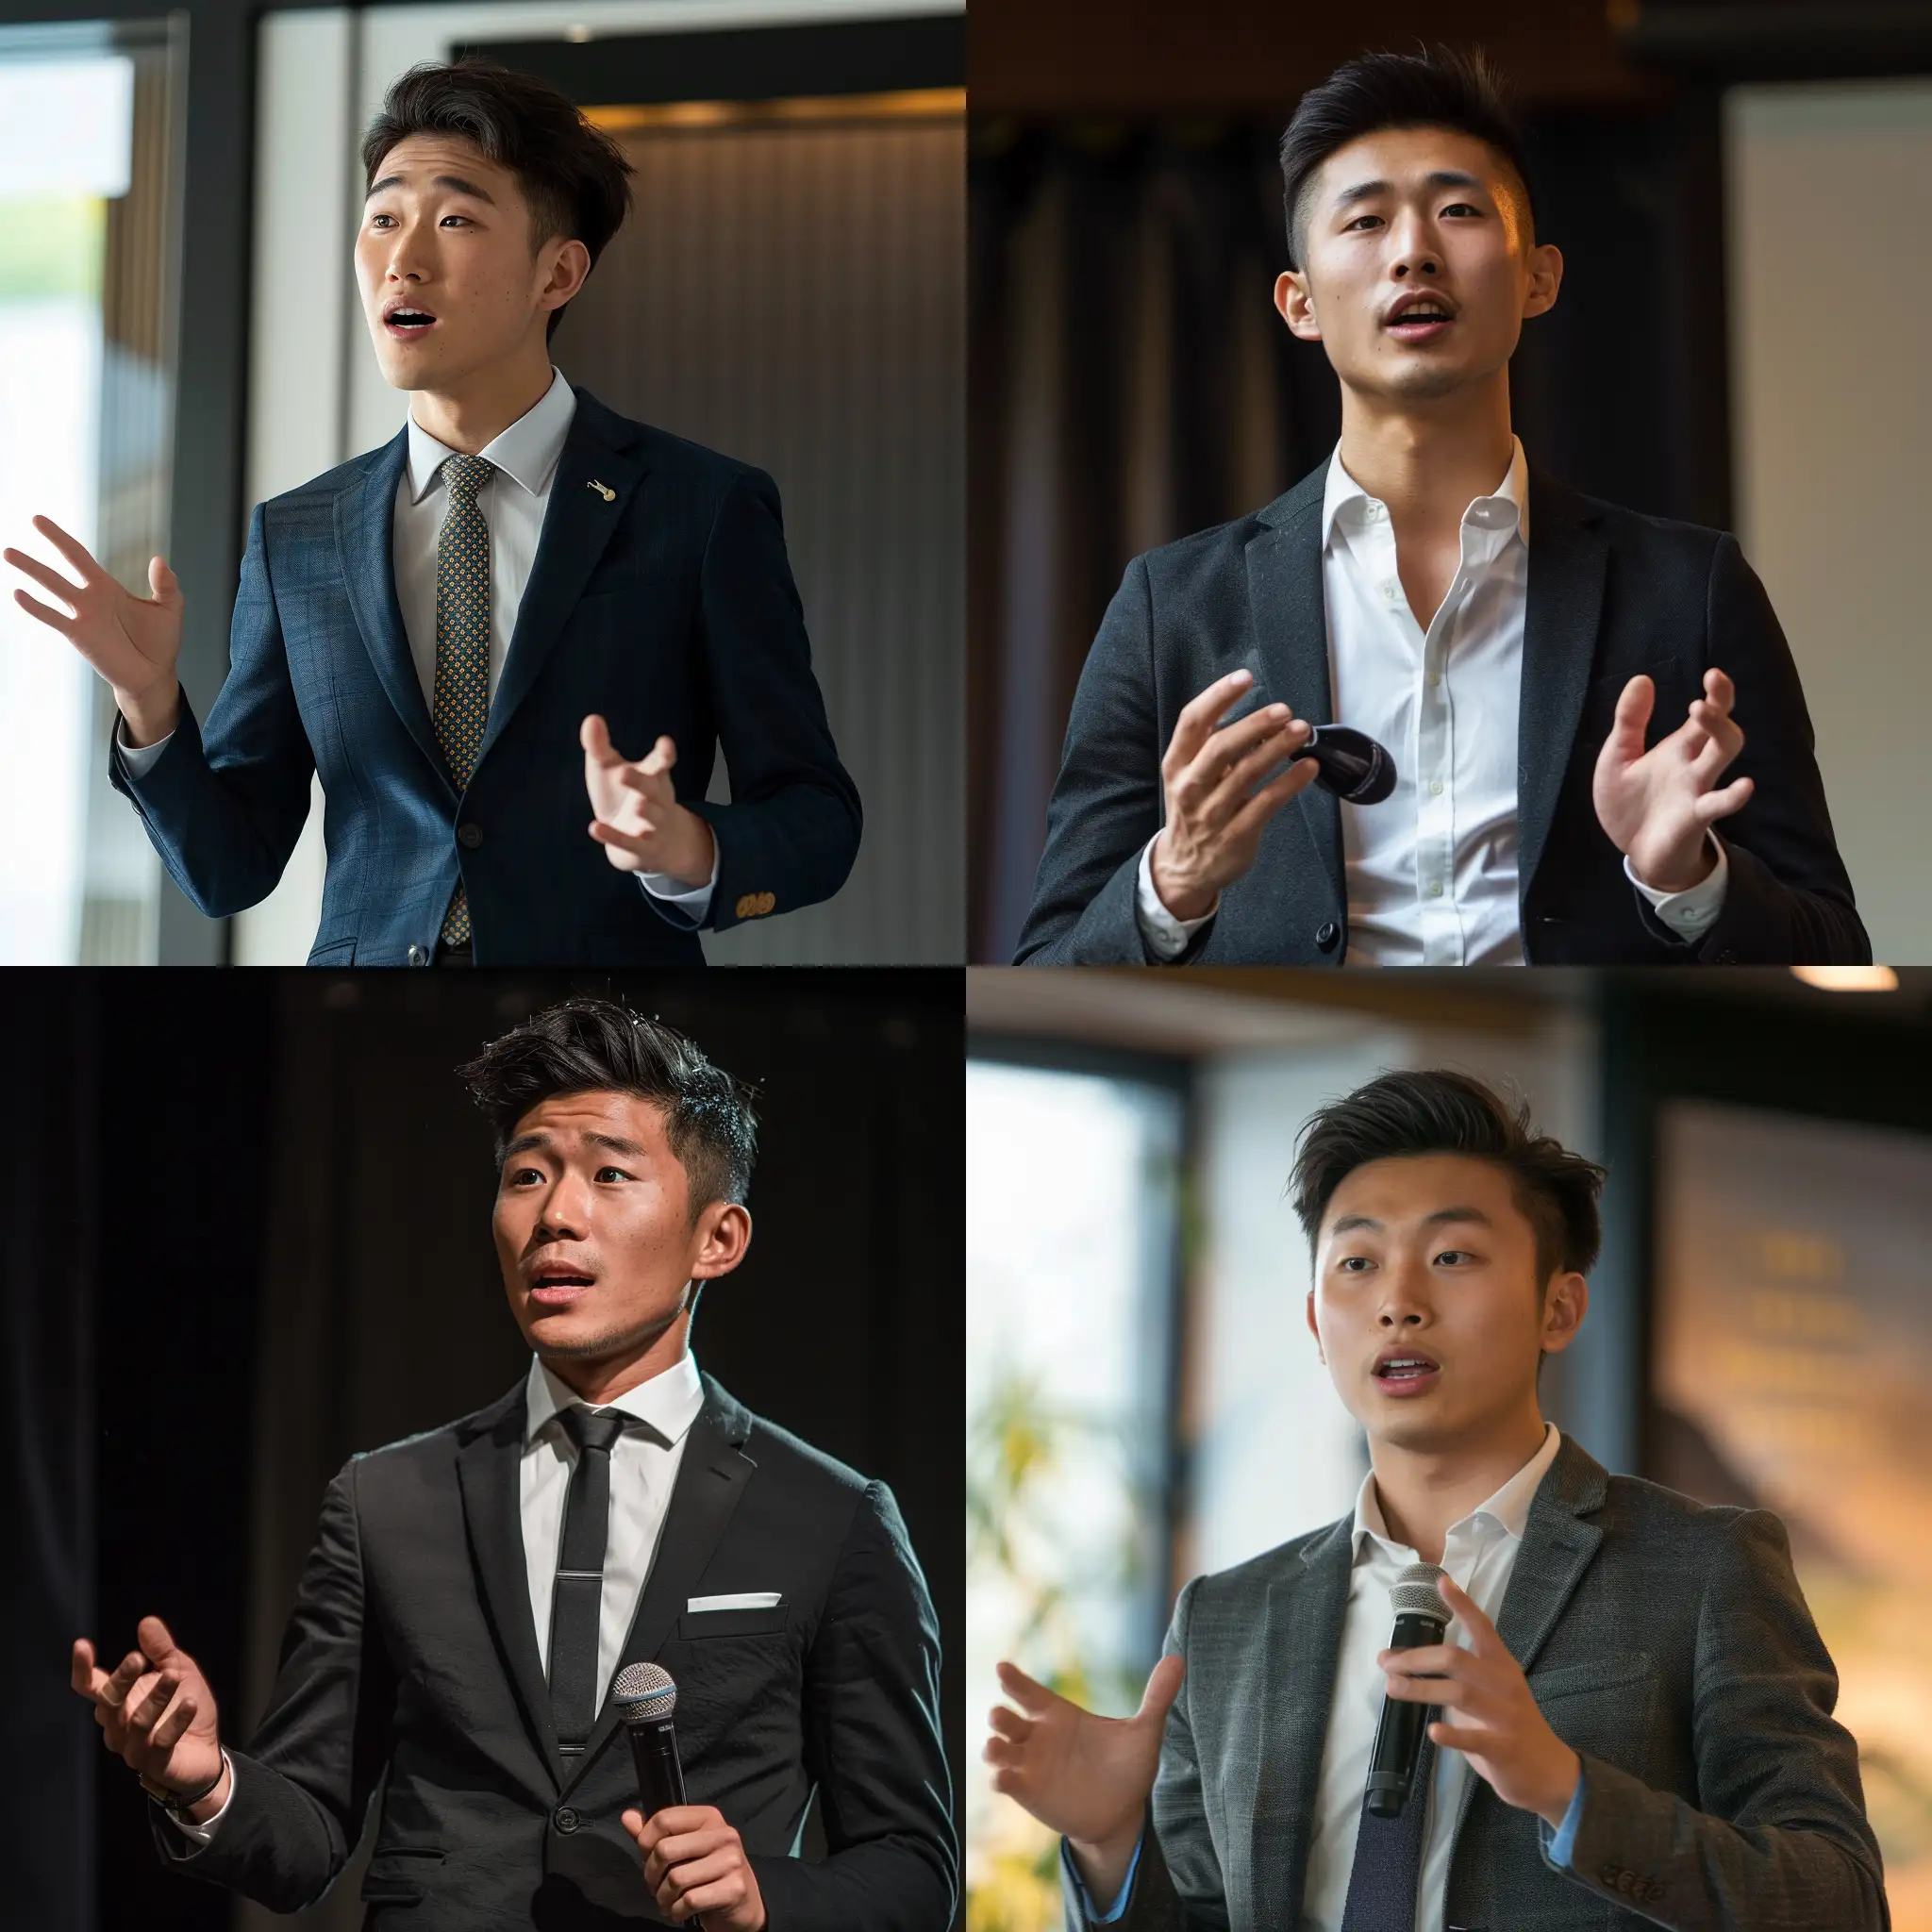 Passionate-Young-Asian-Man-Giving-a-Speech